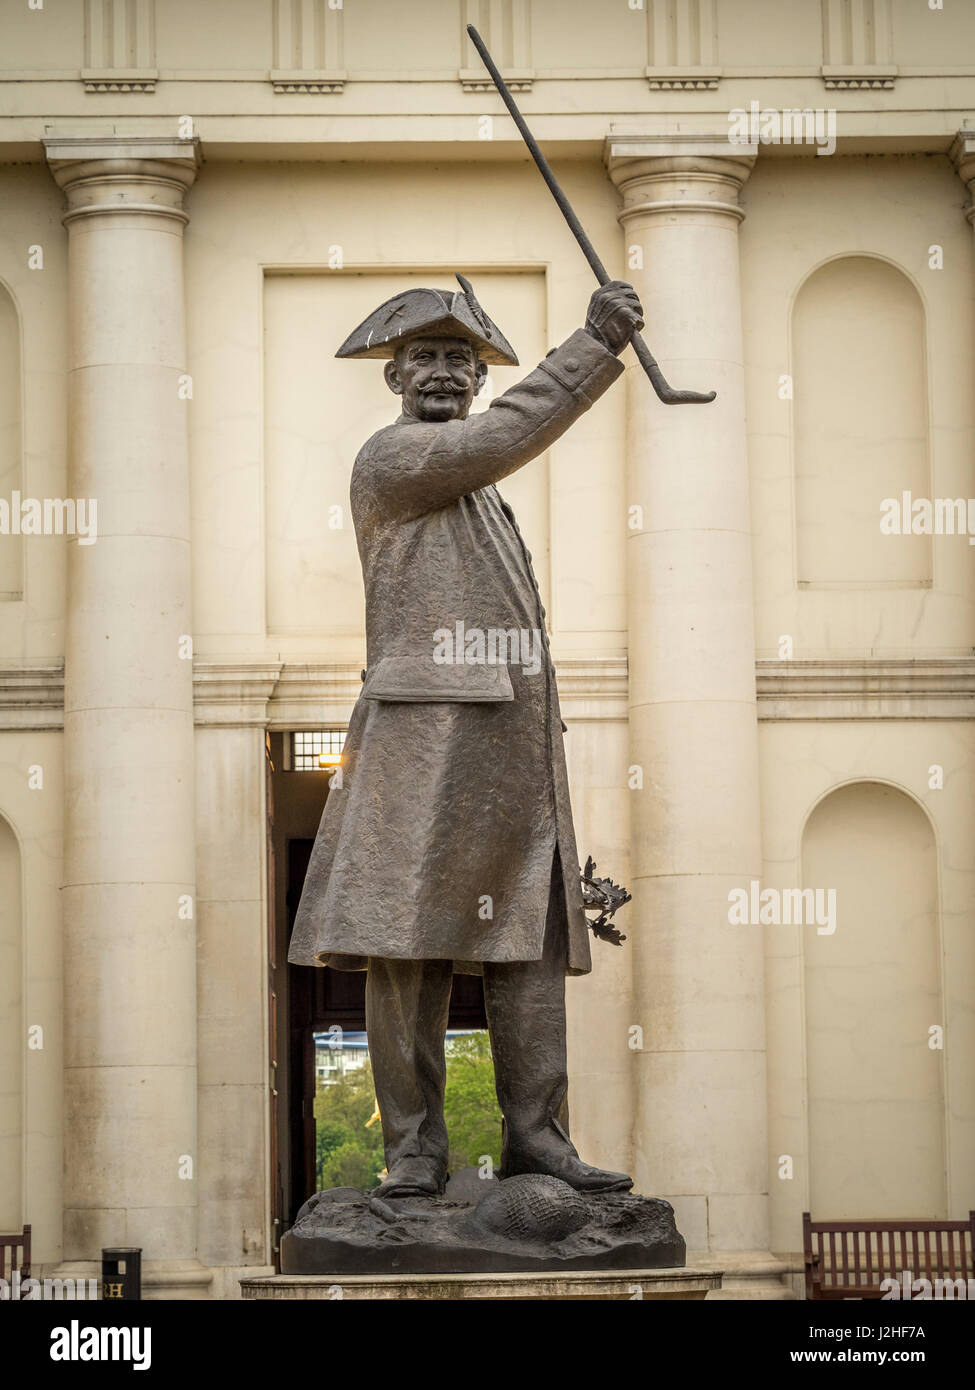 The 'In-Pensioner' bronze statue of a Chelsea pensioner outside the north entrance to the Chelsea Royal Hospital, London, UK Stock Photo